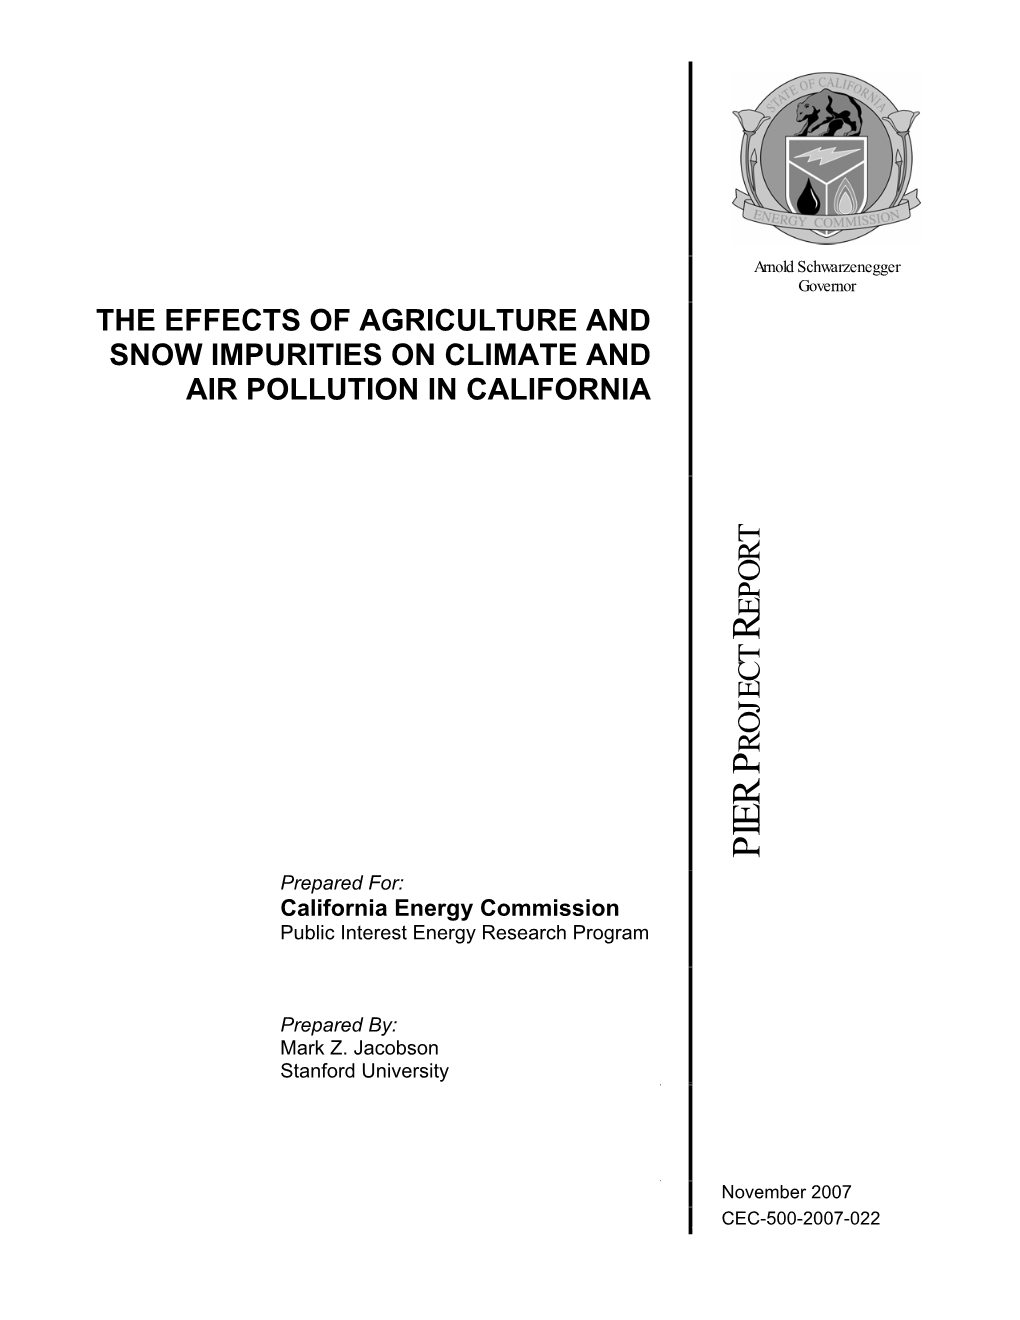 The Effects of Agriculture and Snow Impurities on Climate and Air Pollution in California